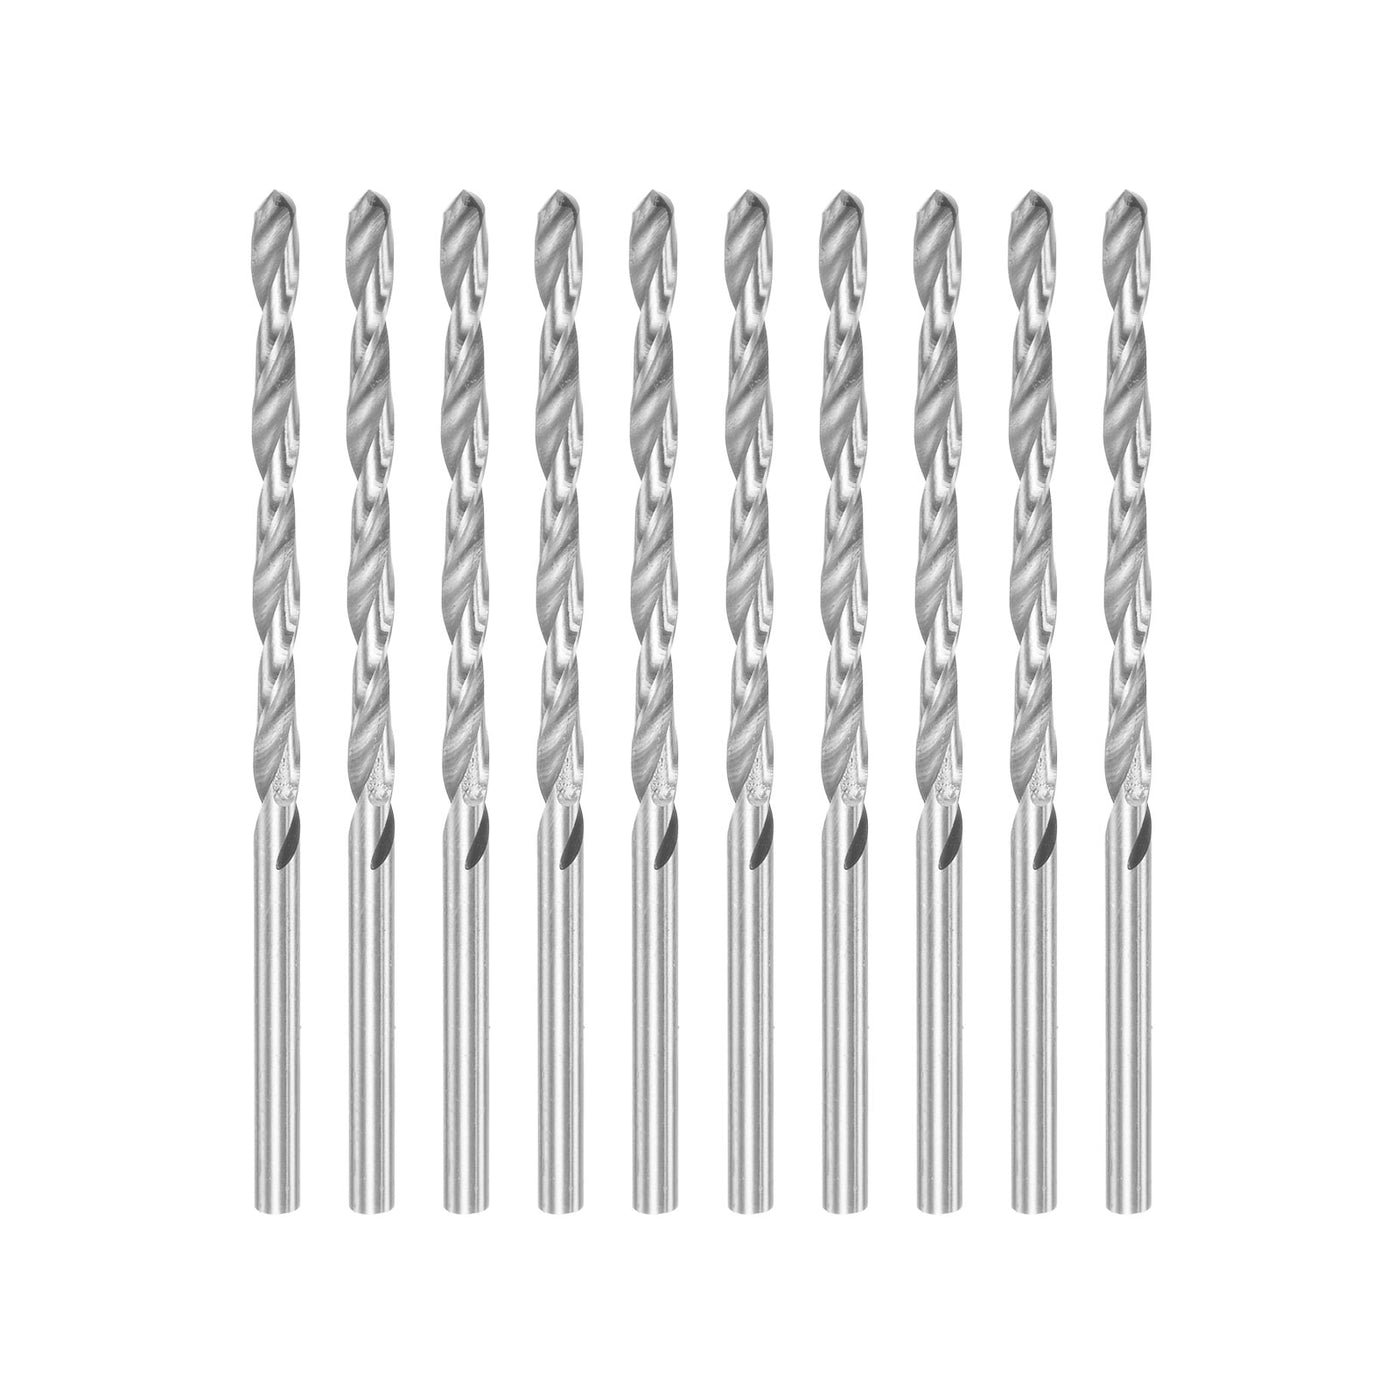 uxcell Uxcell 10 Pcs 3mm High Speed Steel Drill Bits, Fully Ground 68mm Length Drill Bit